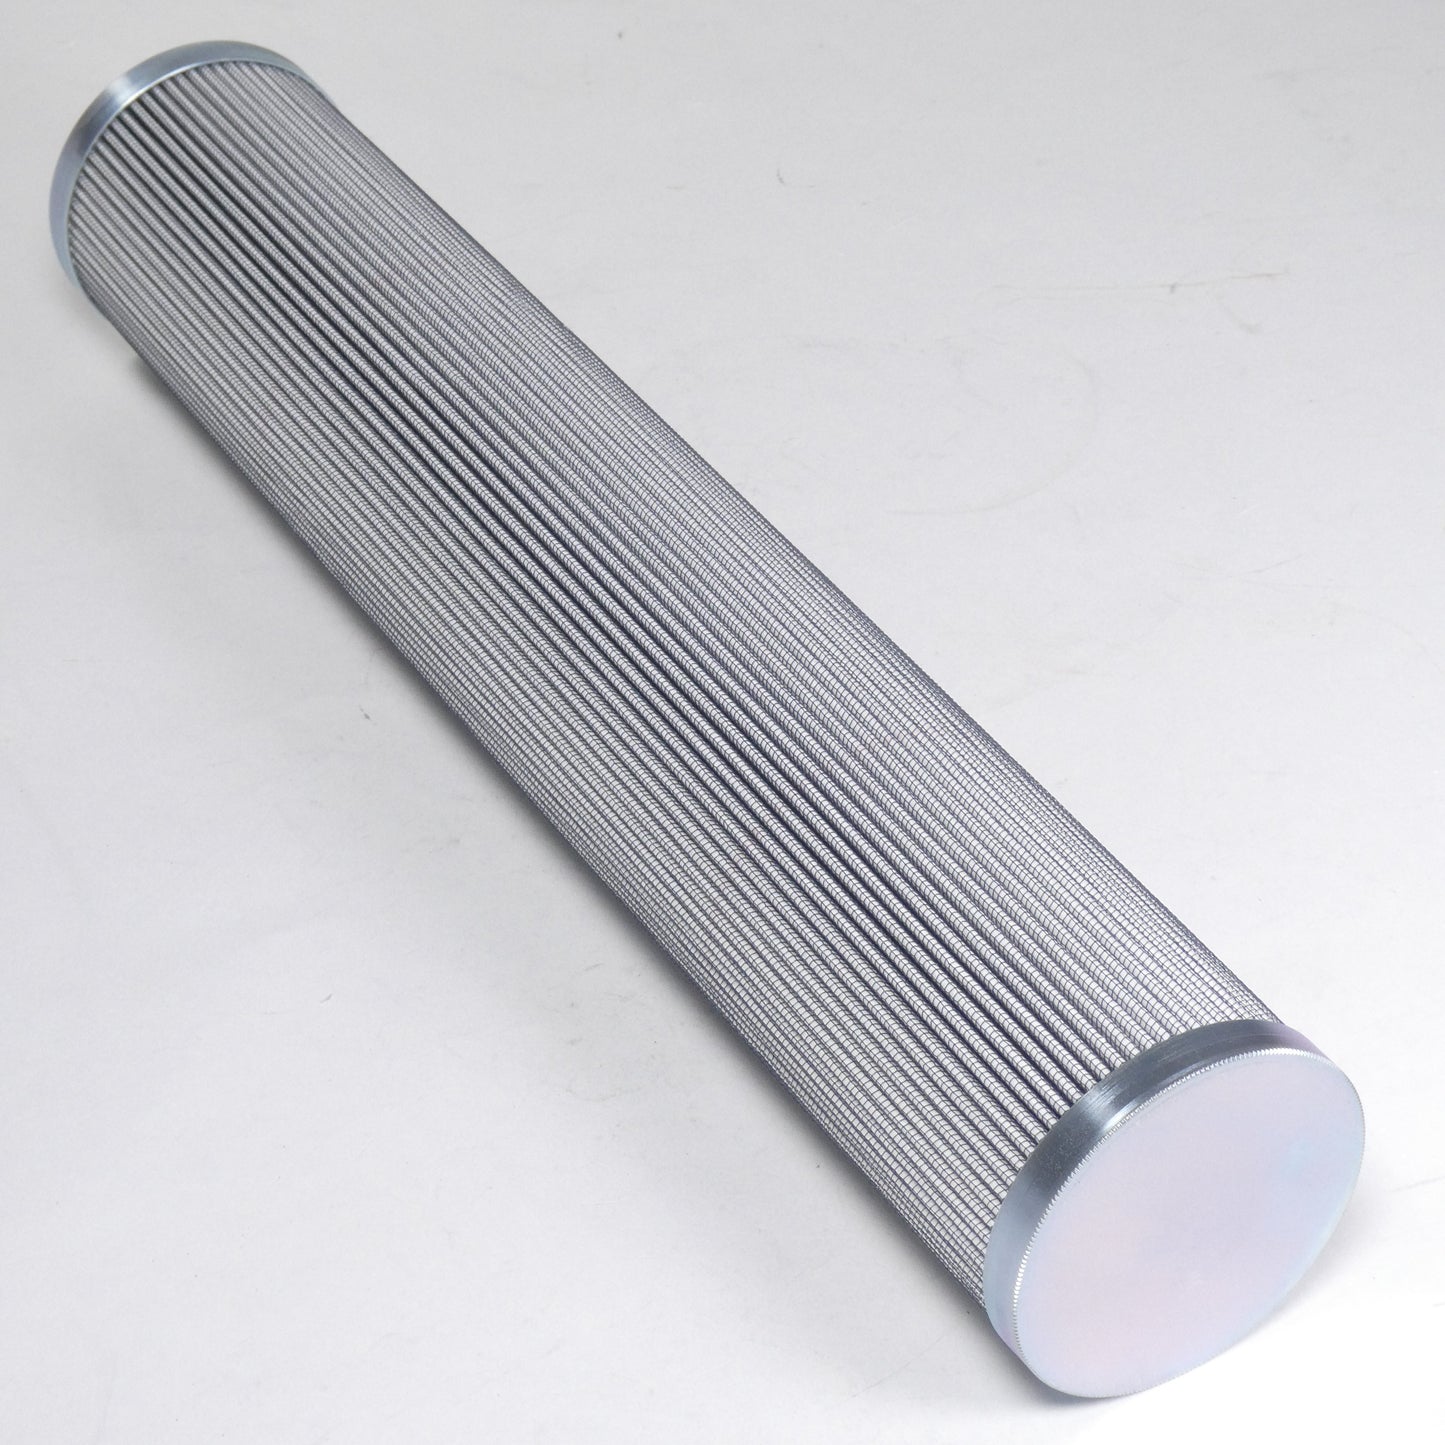 Hydrafil Replacement Filter Element for Hilco HP321-12-GE